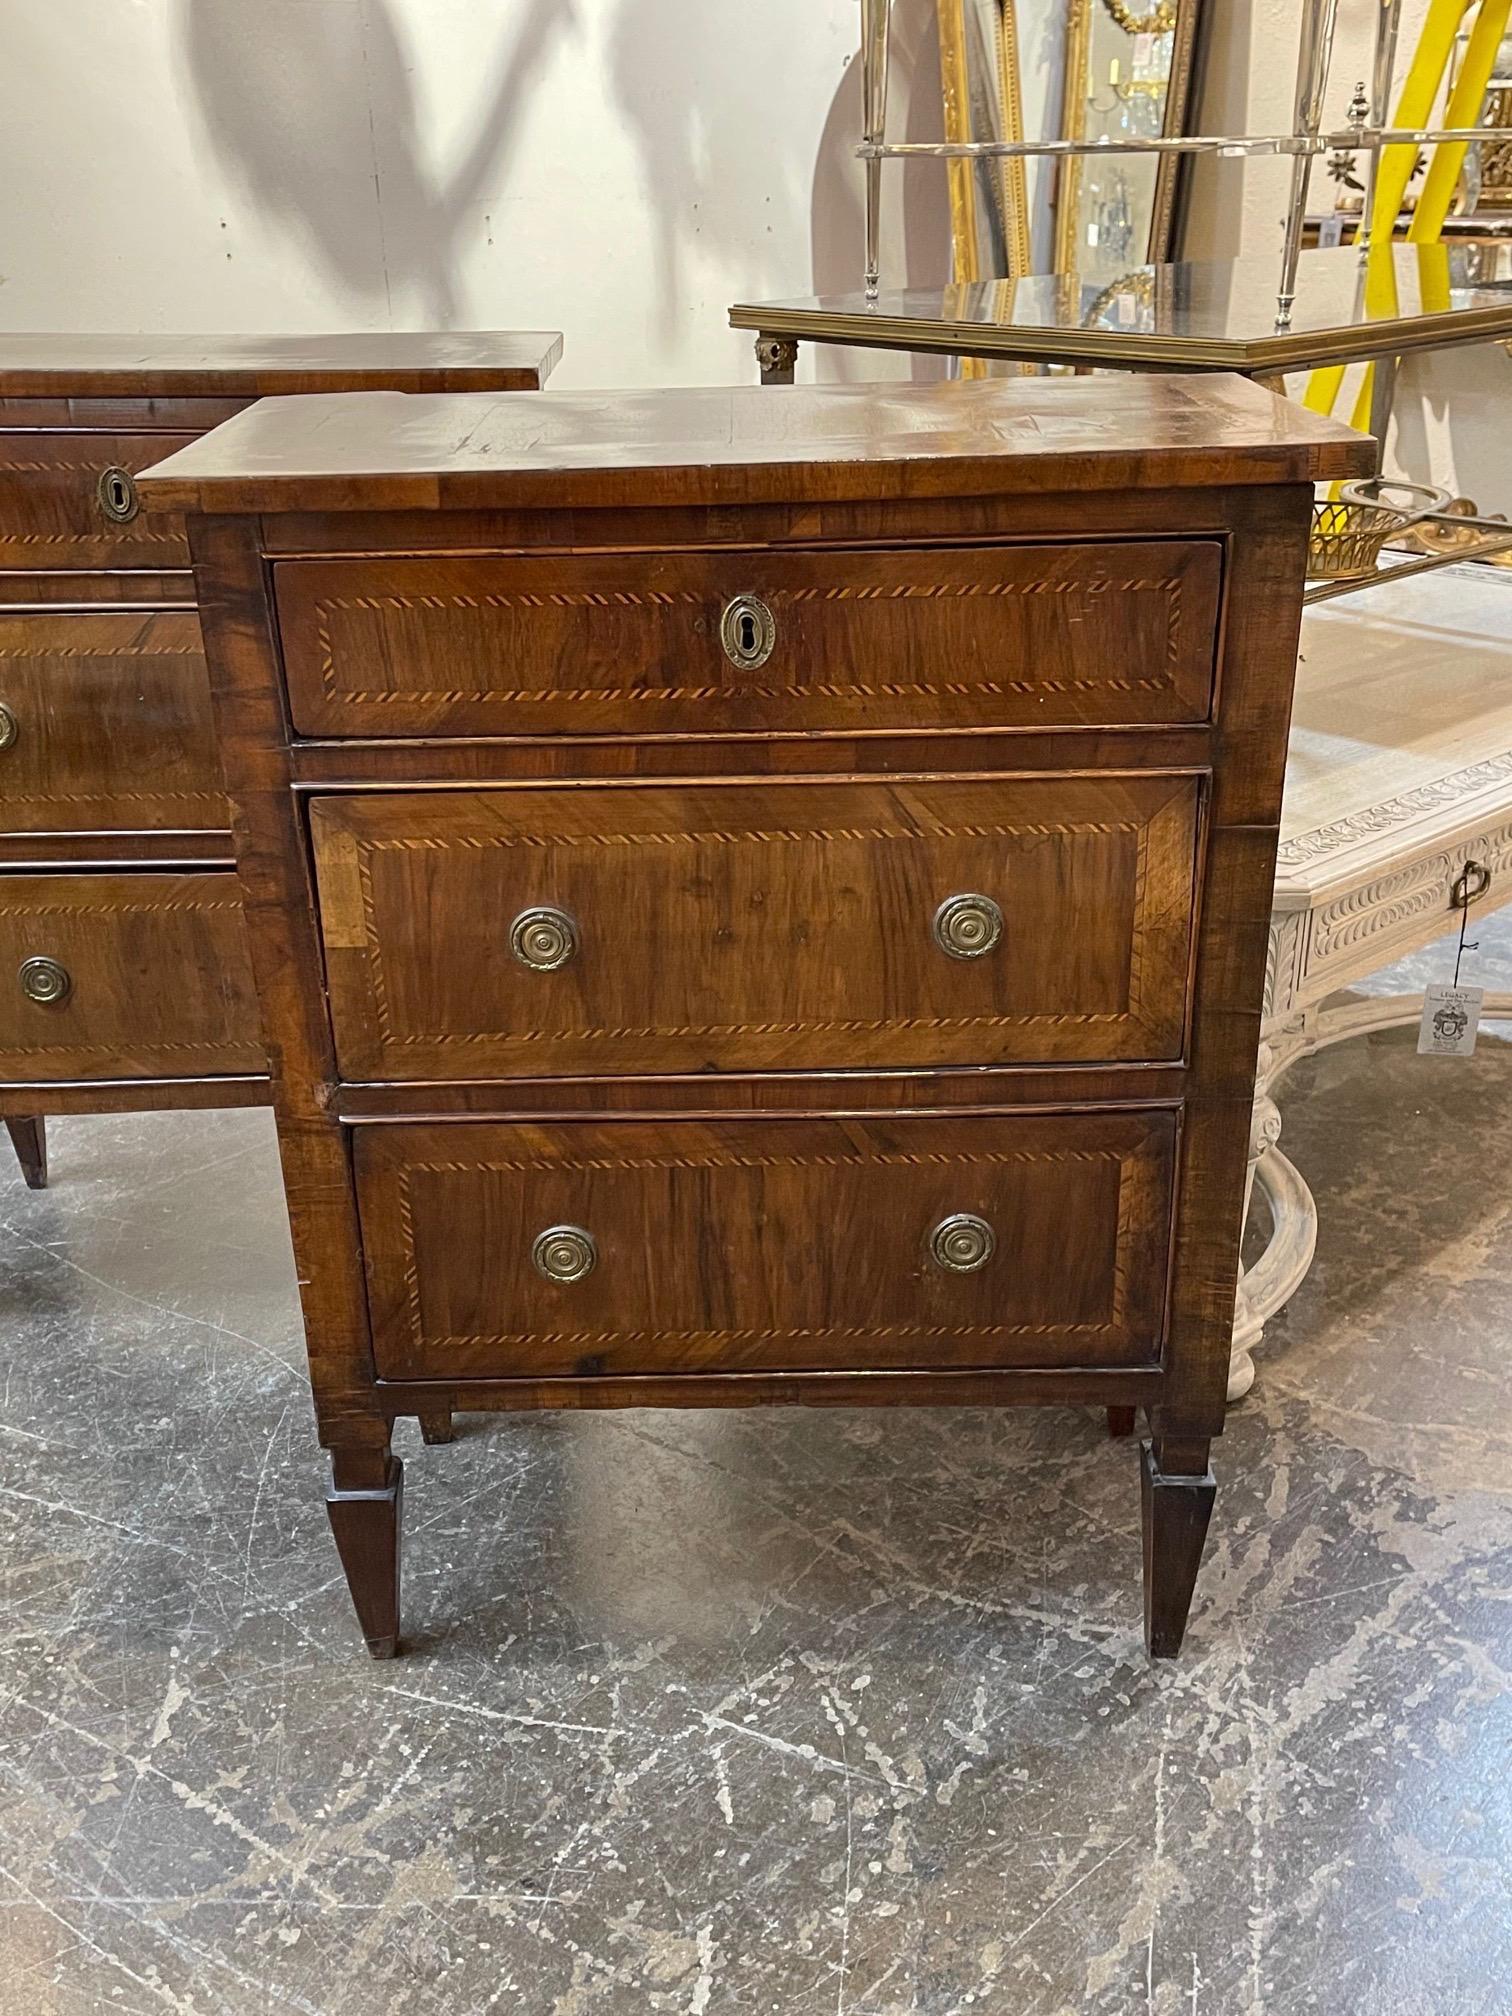 Elegant pair of 18th century Italian walnut commodes. Pretty inlaid pattern on the tops and on the drawers. Creates a very polished look!